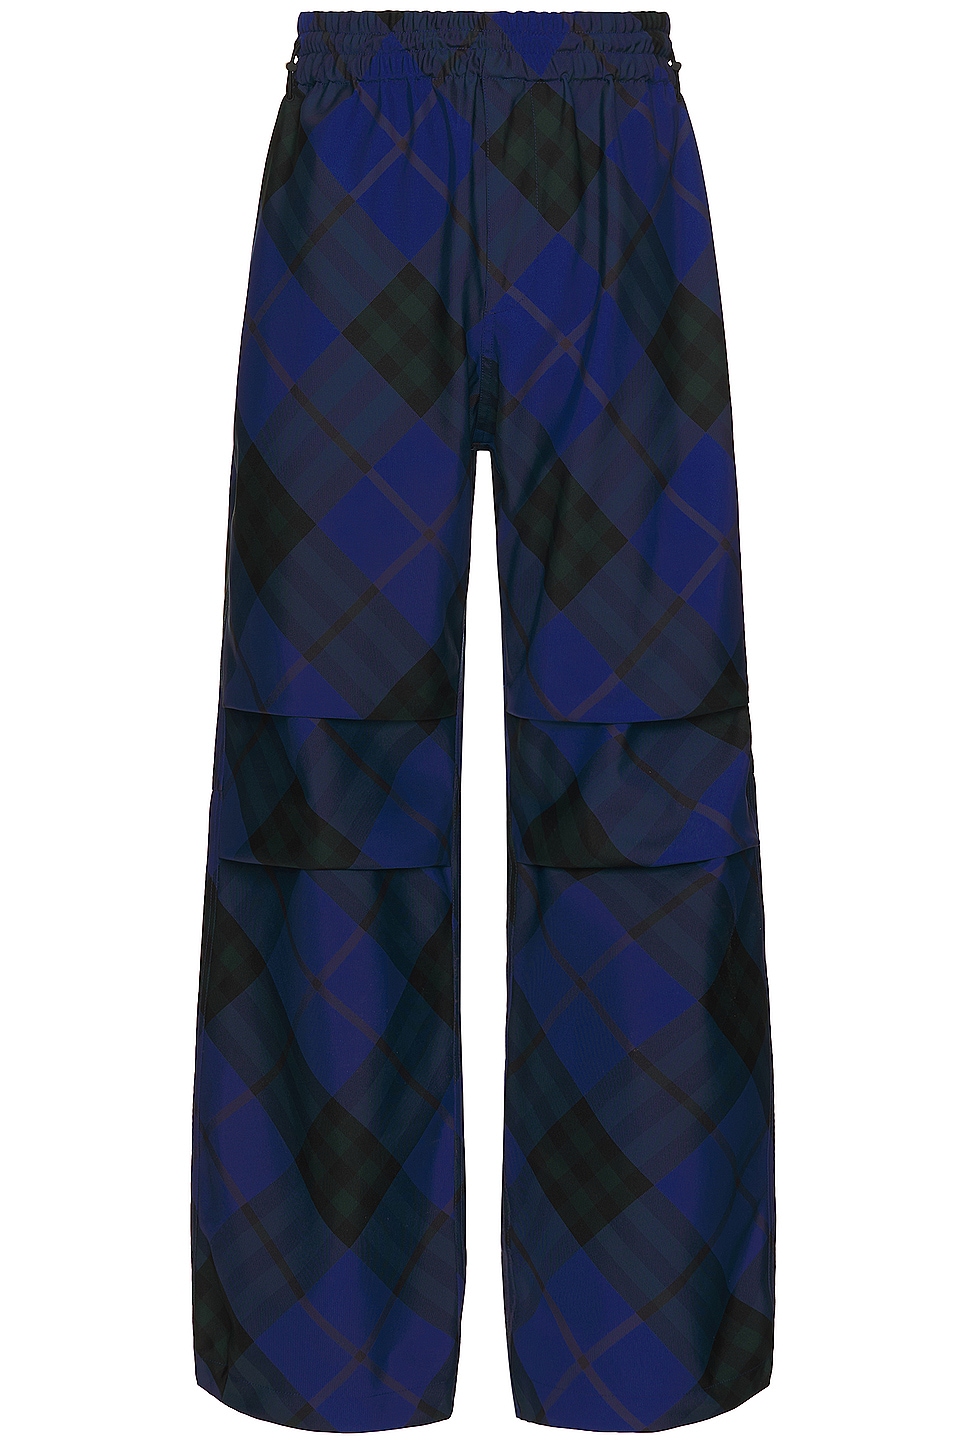 Image 1 of Burberry Check Pattern Trouser in Knight Ip Check